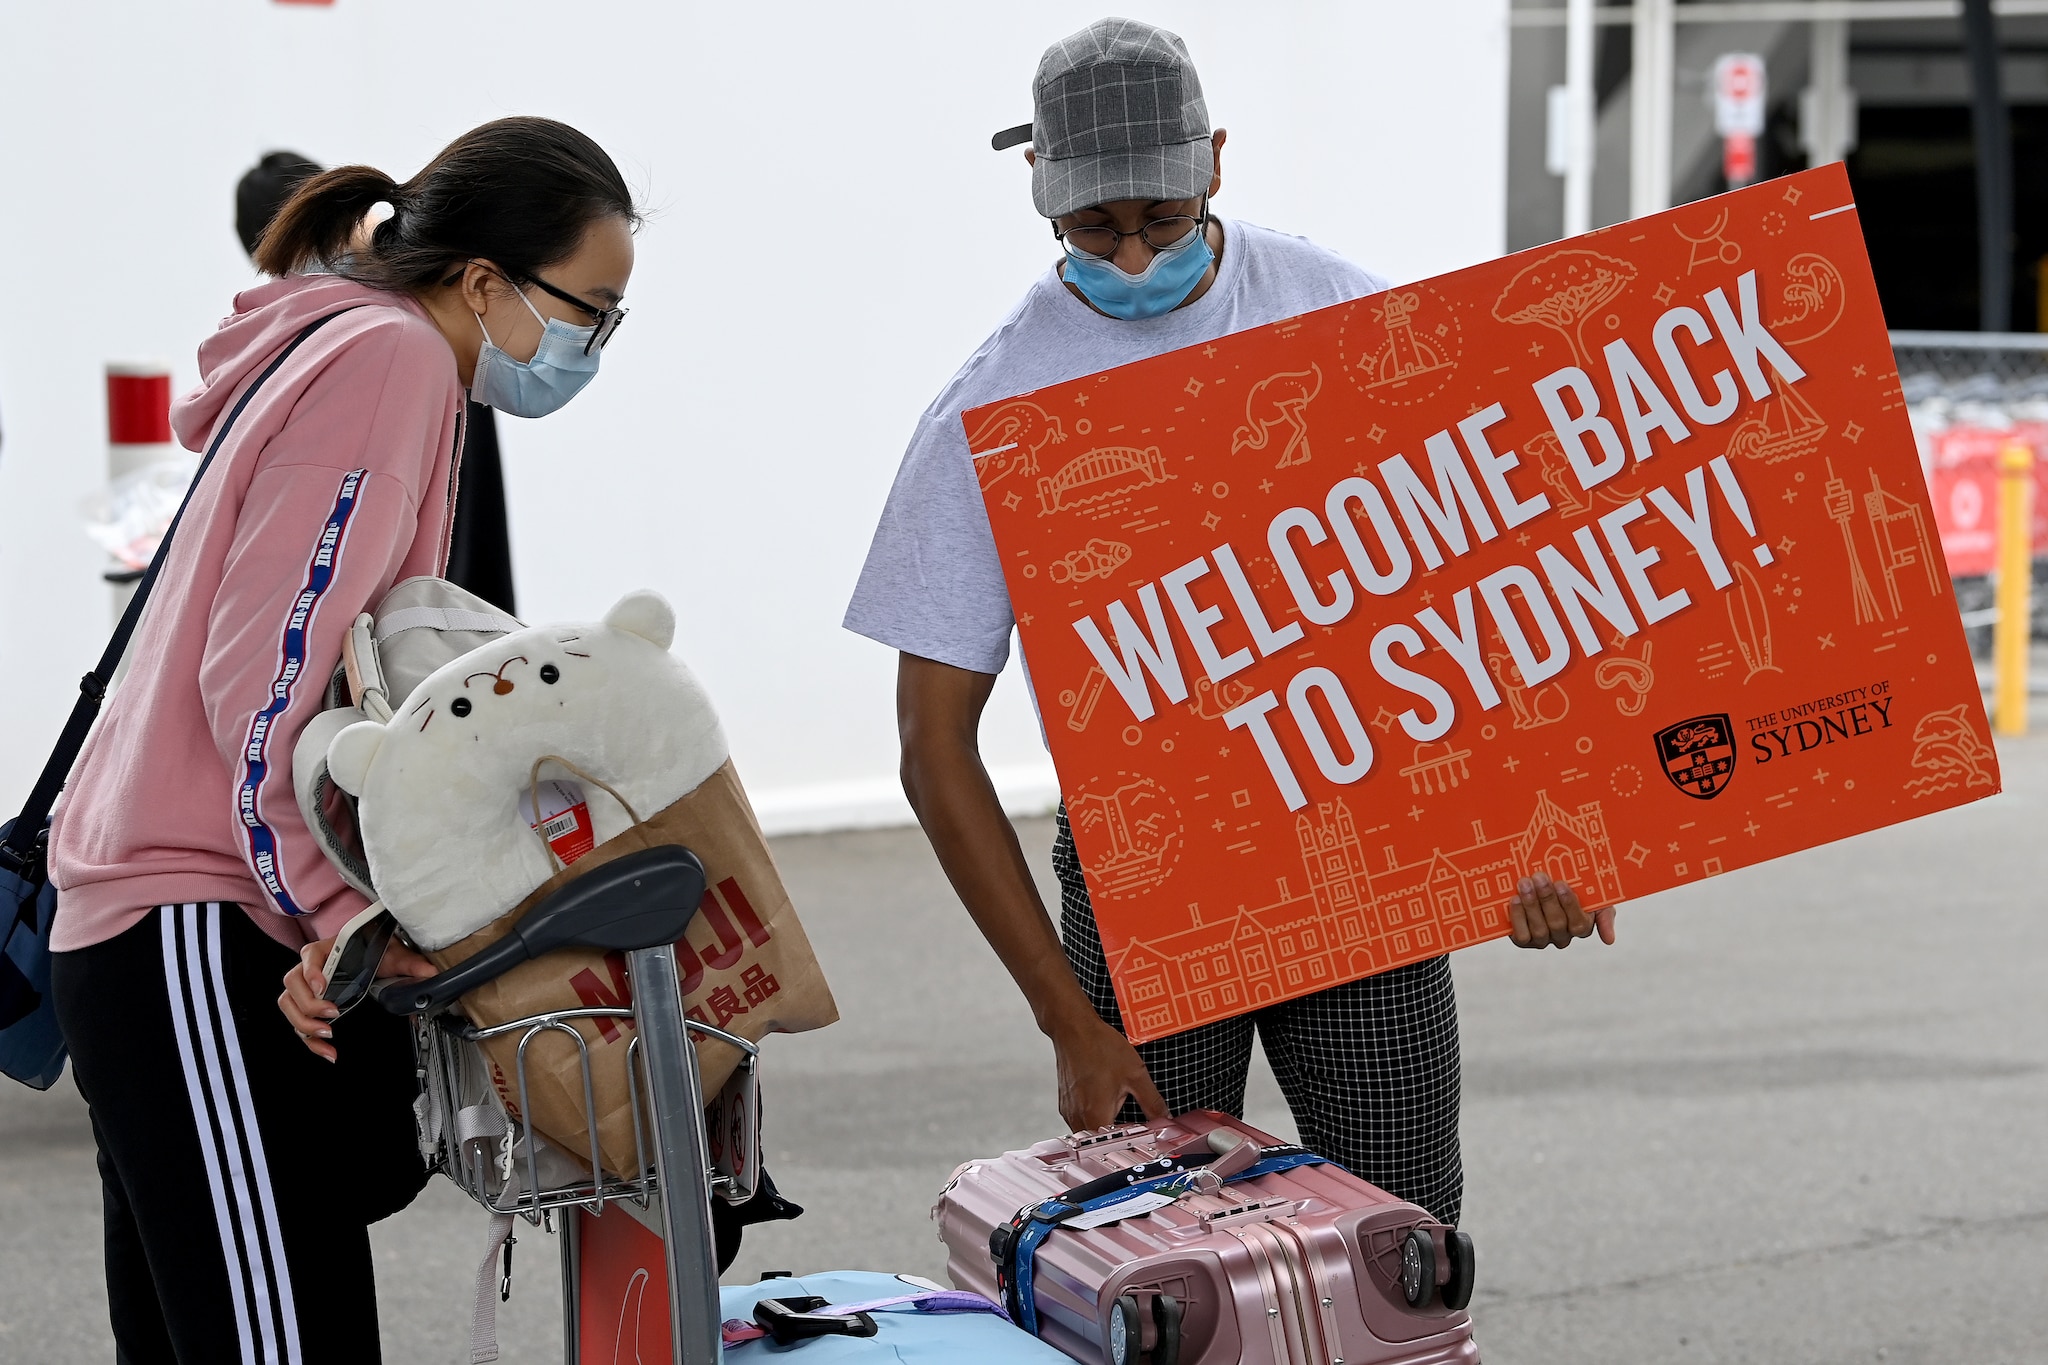 International students were among the first to be allowed to enter Australia.